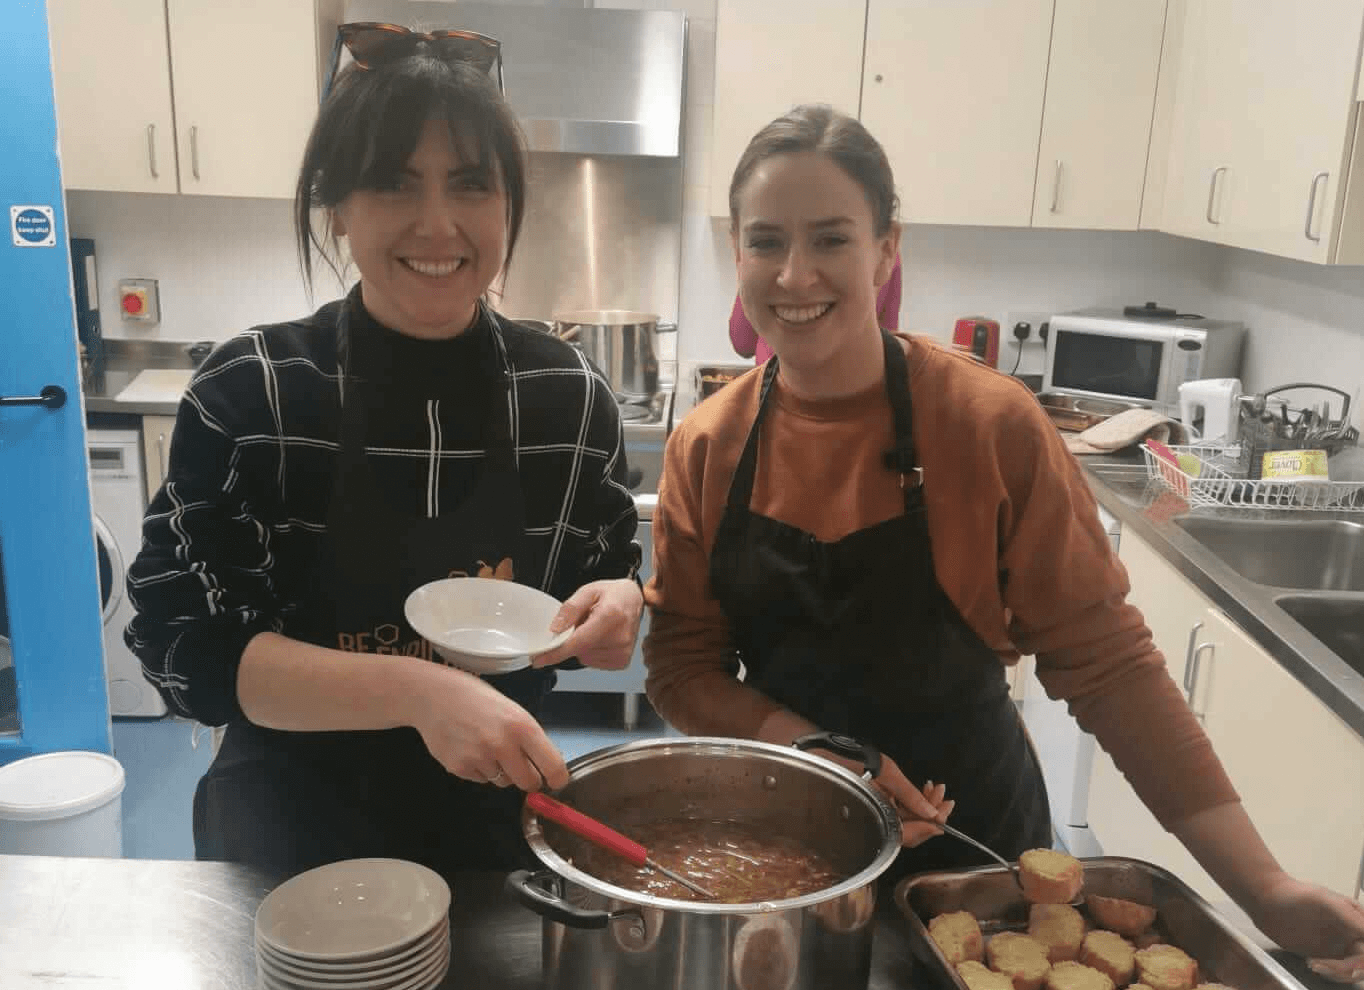 Be Enriched – The London nonprofit connecting communities through food